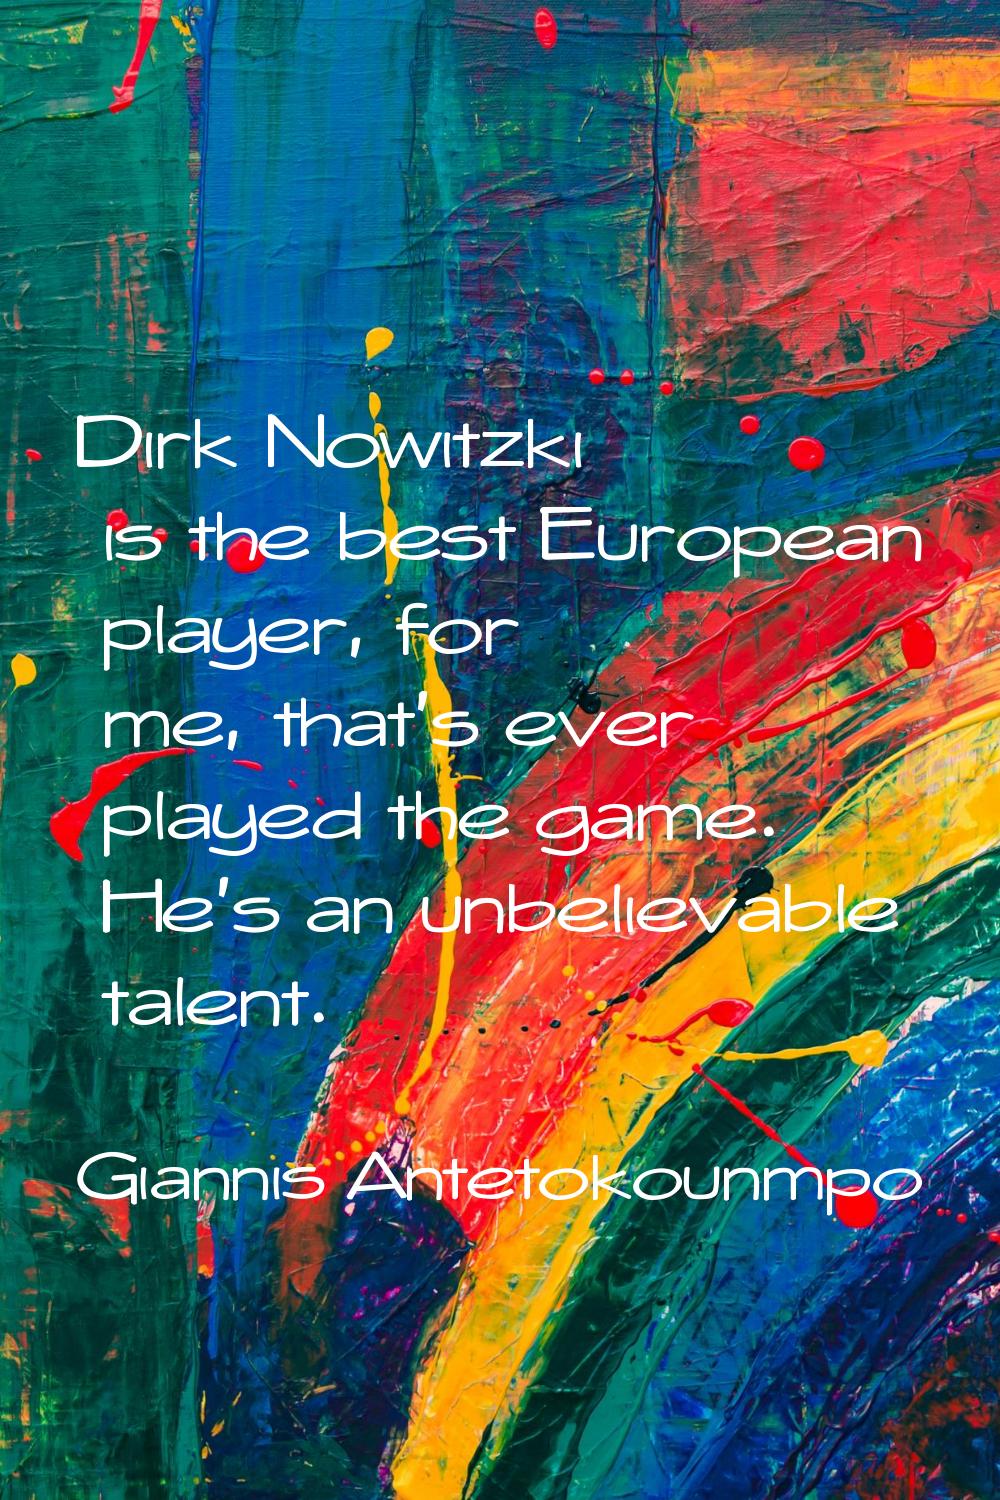 Dirk Nowitzki is the best European player, for me, that's ever played the game. He's an unbelievabl